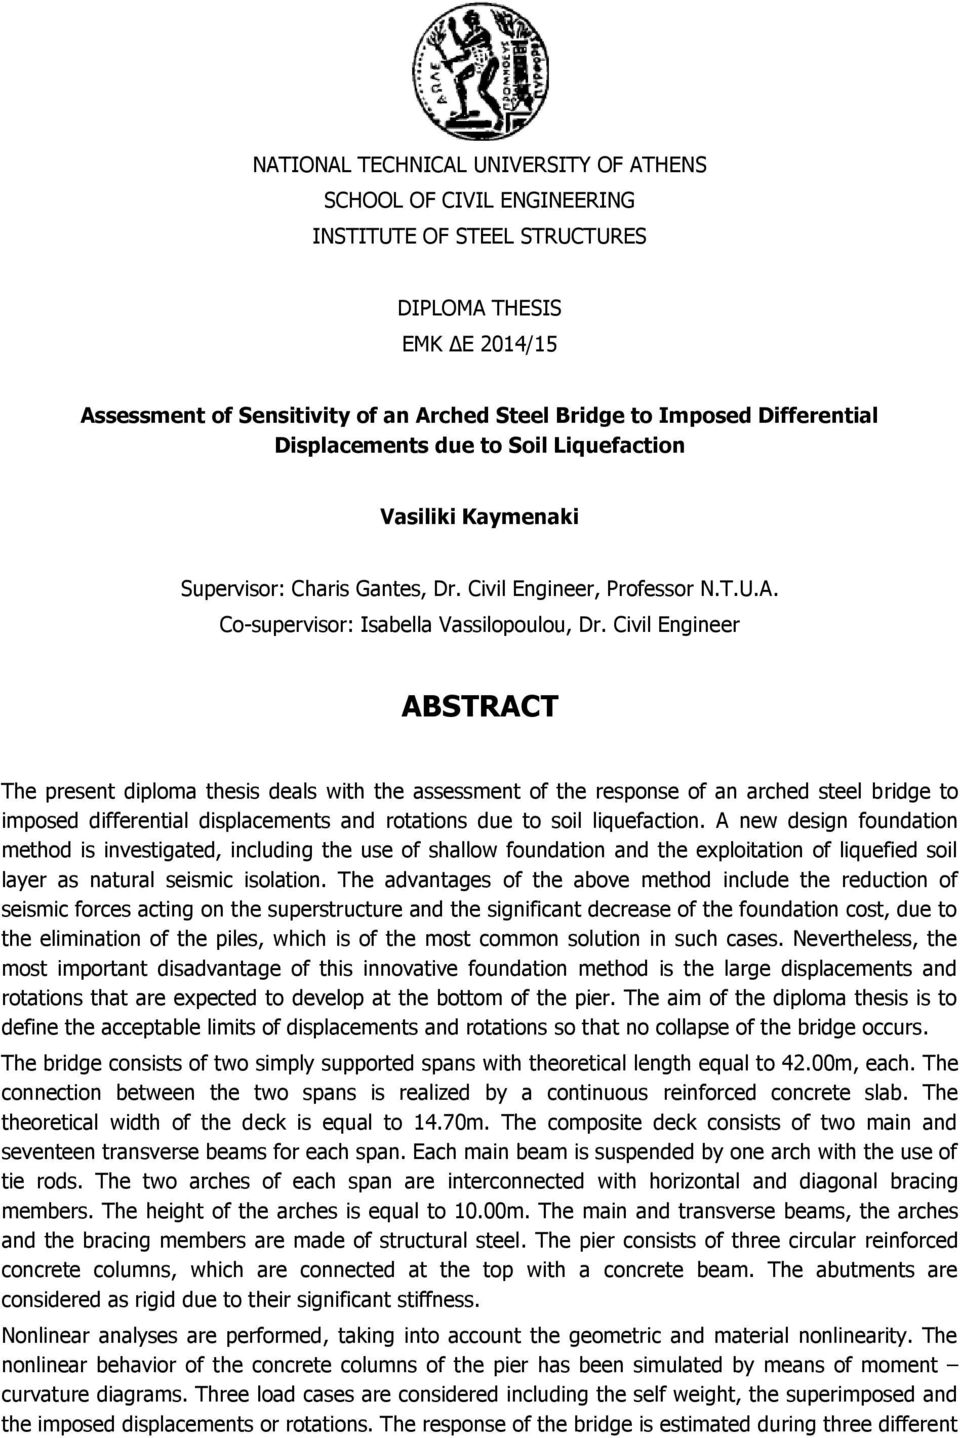 Civil Engineer ABSTRACT The present diploma thesis deals with the assessment of the response of an arched steel bridge to imposed differential displacements and rotations due to soil liquefaction.